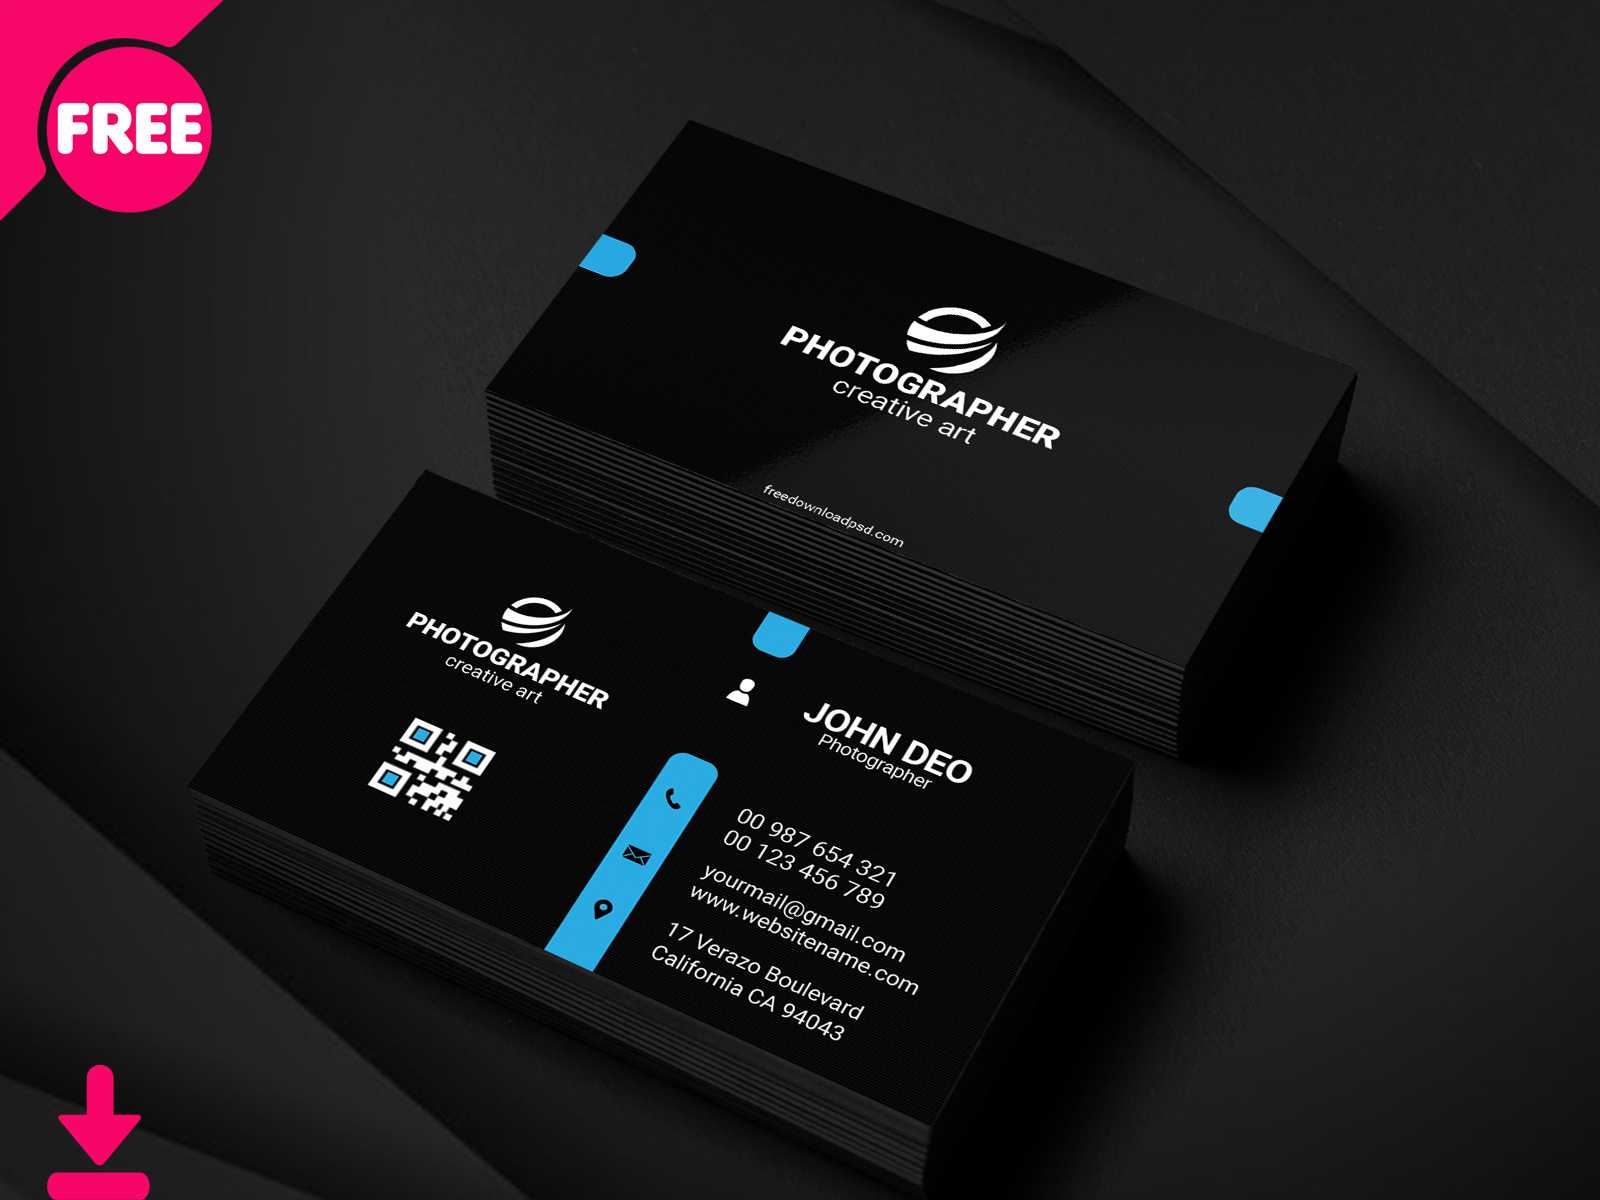 Free Personal Business Card Psd Template Coversheikh With Free Personal Business Card Templates